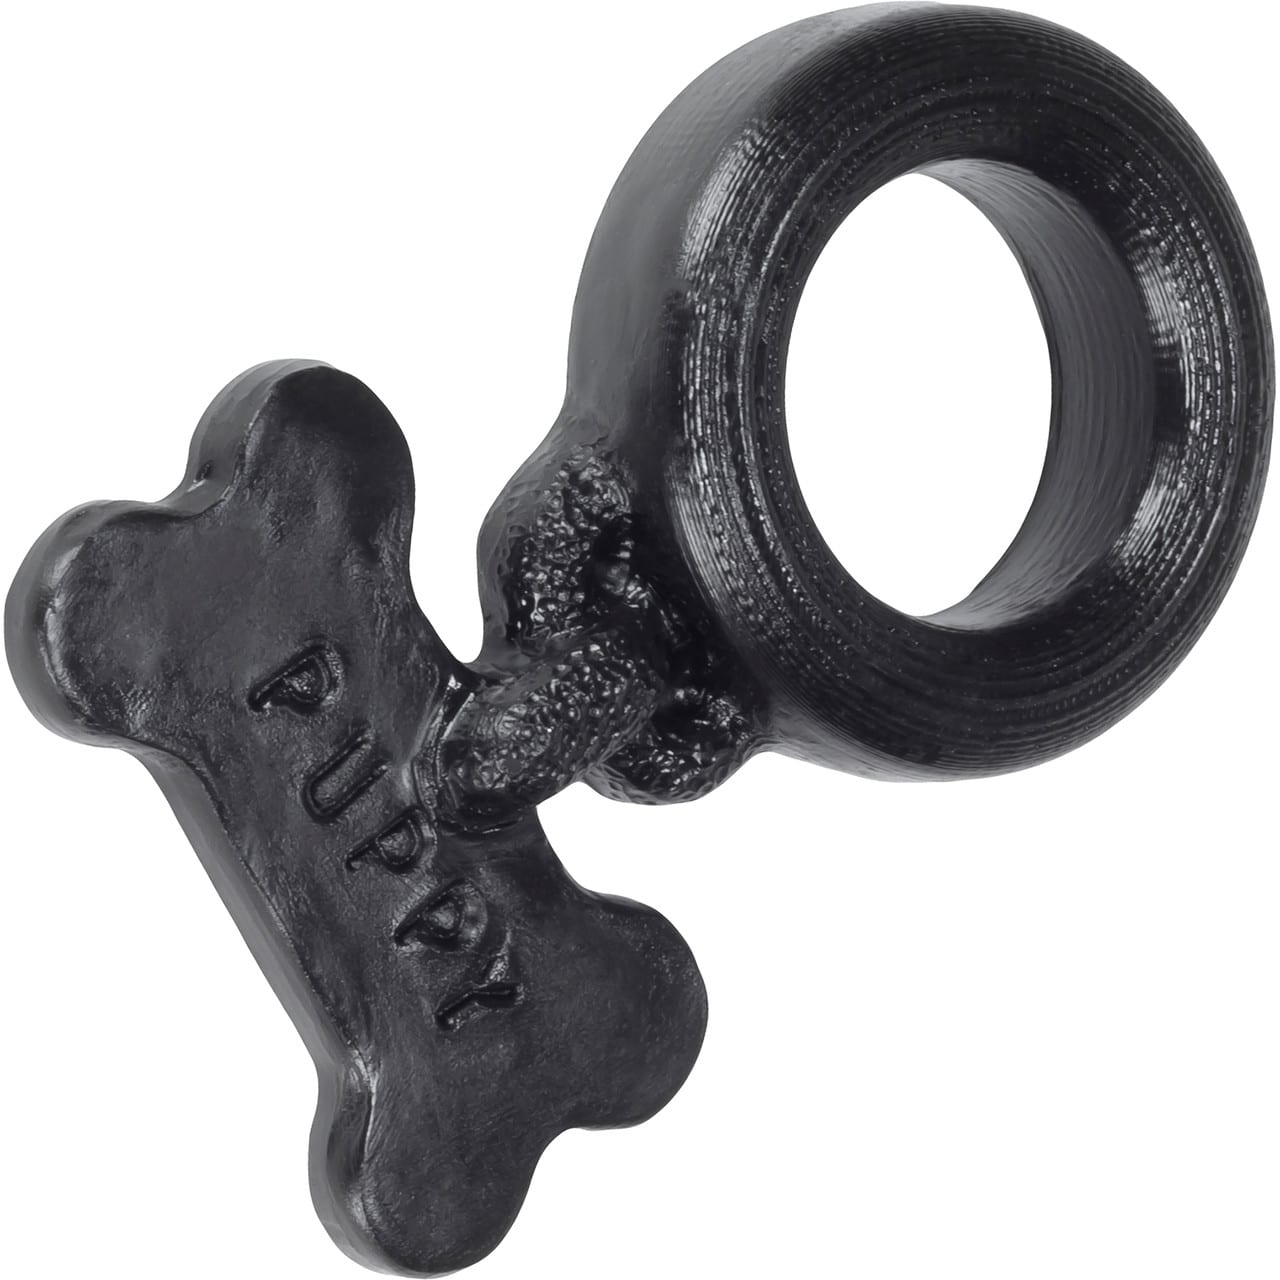 Oxballs Puppy Silicone Cock Ring